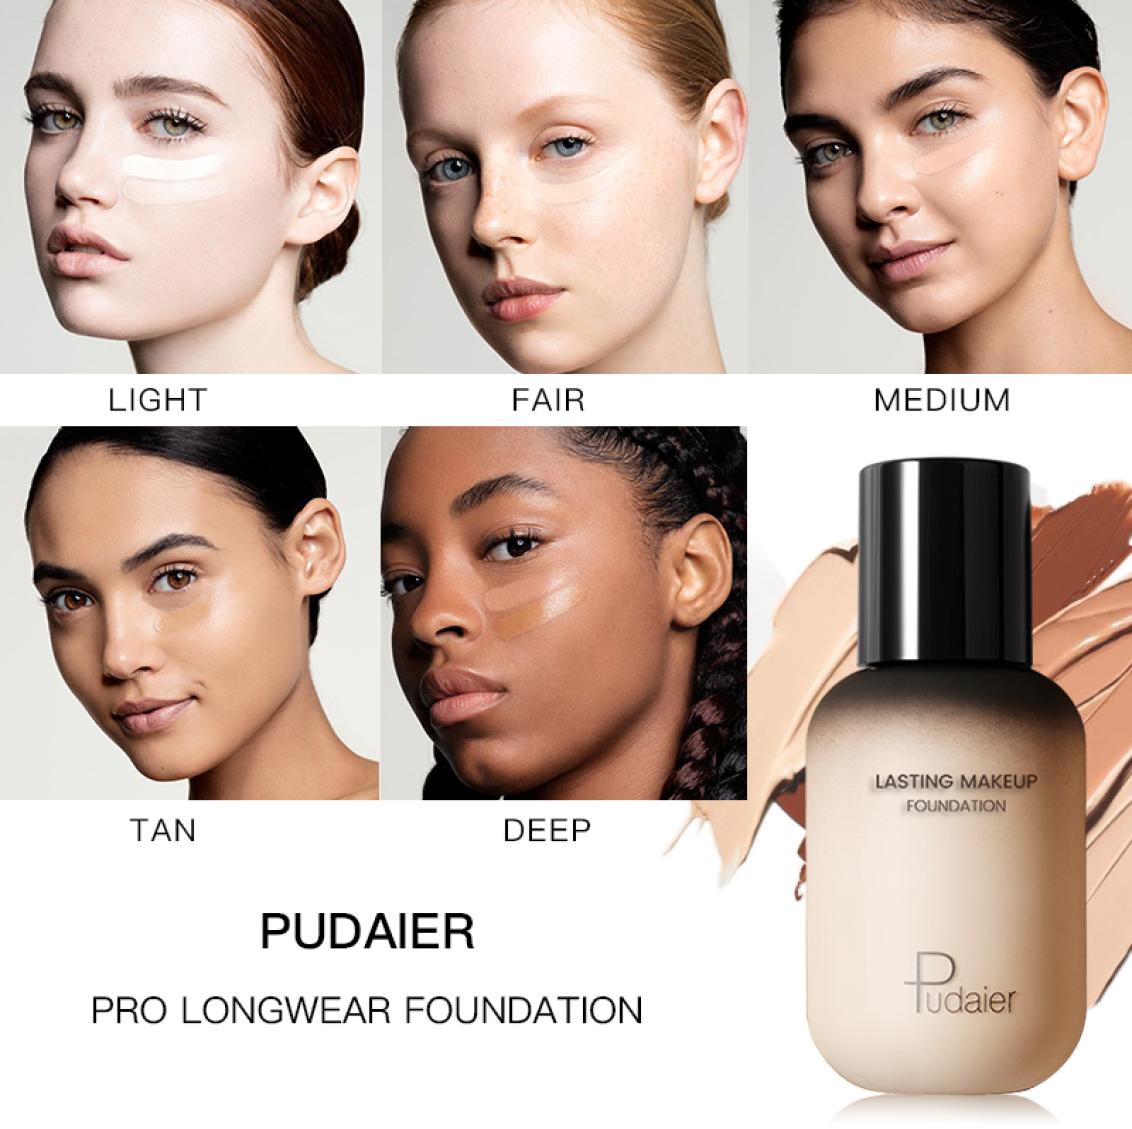 

40 Colors Foundation Pudaier New 40ML Various Color Changing Liquid Foundation Makeup Change To Your Skin Tone By Just Blending6237001, Army green